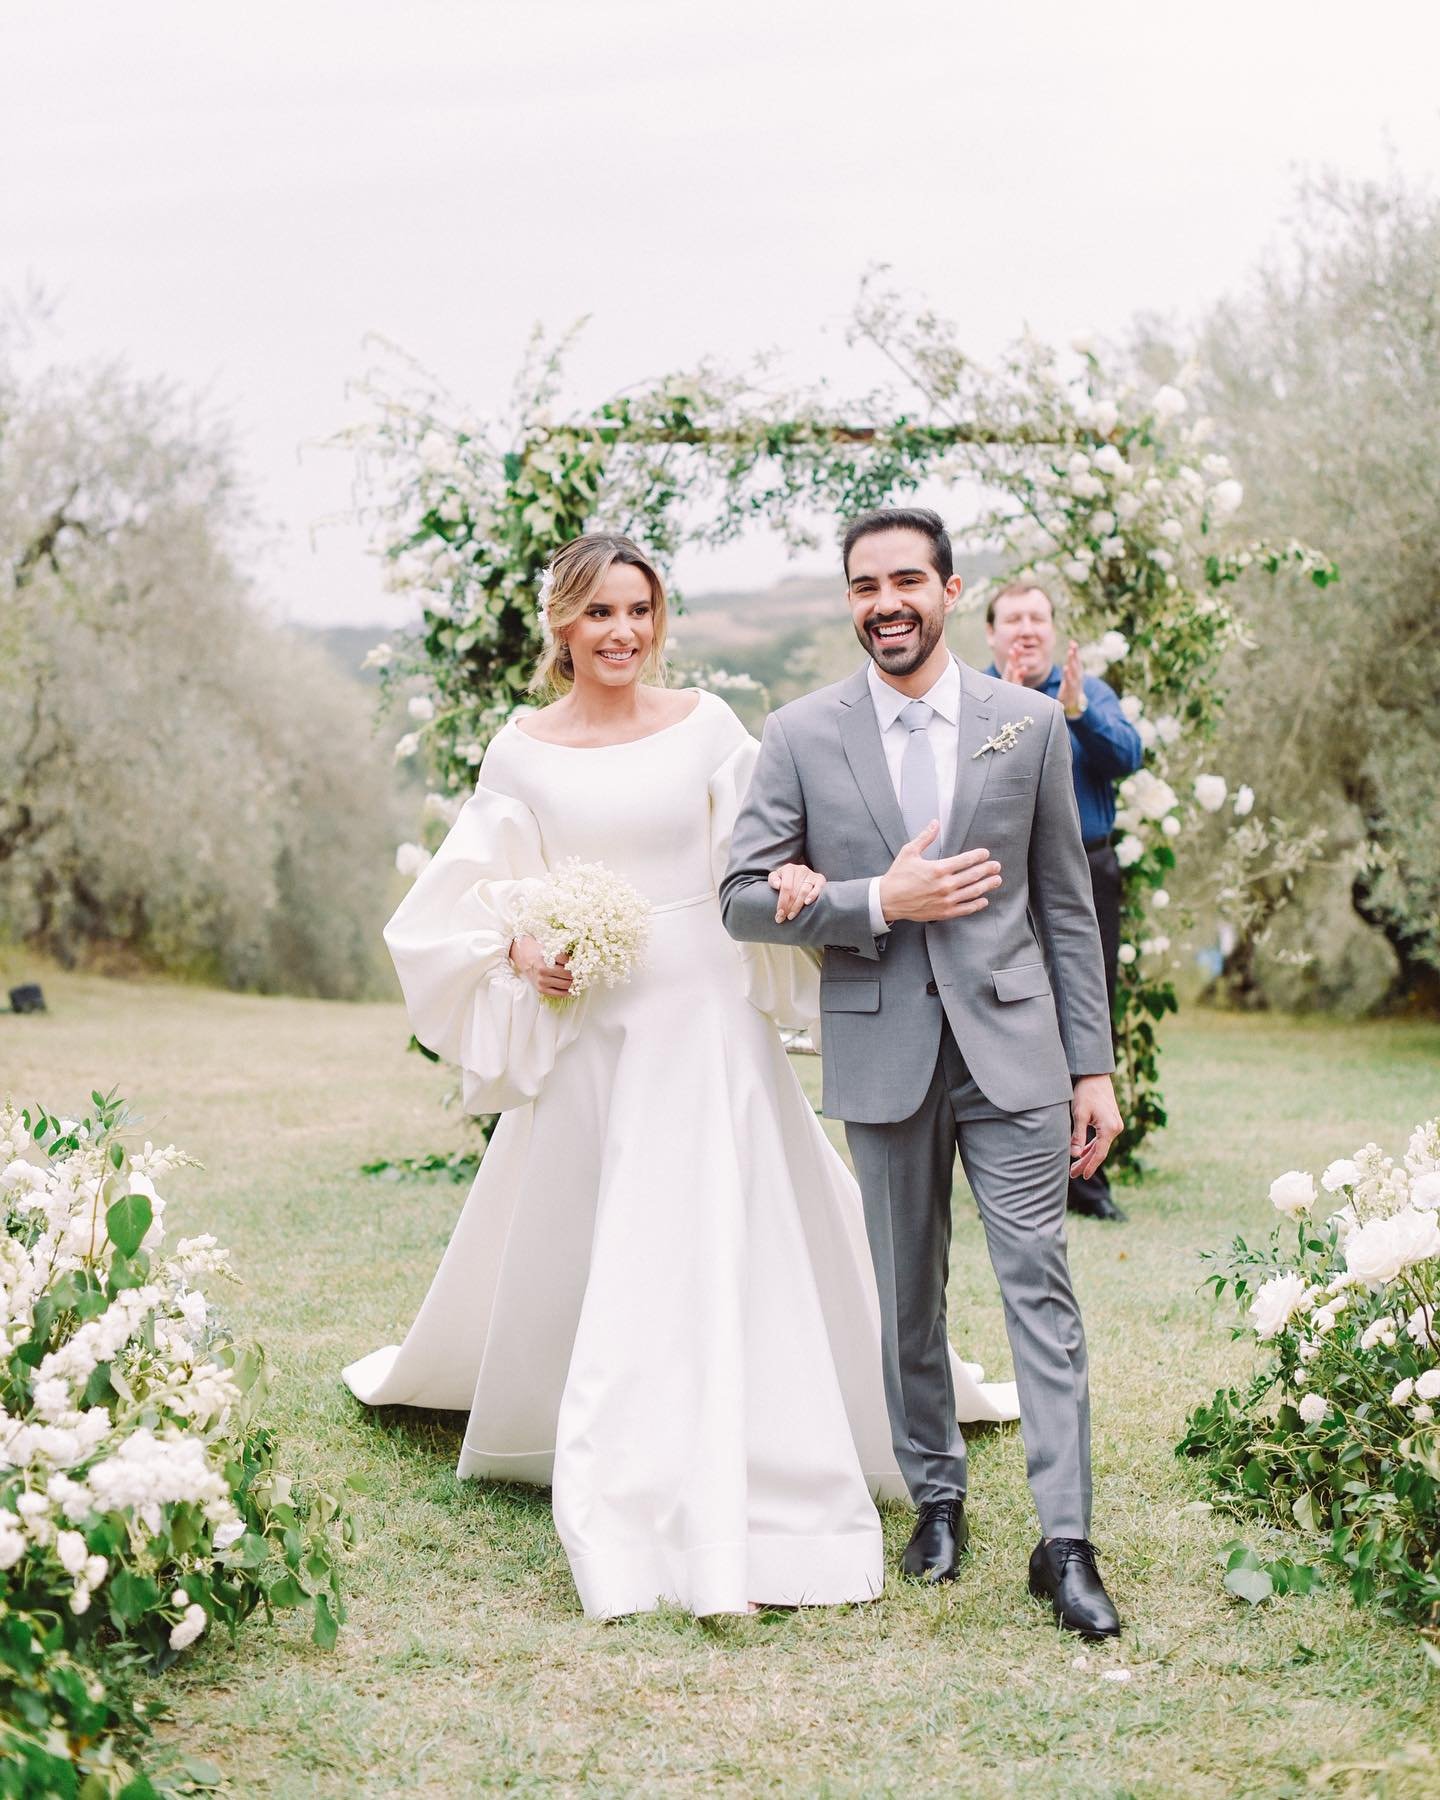 Maya and Rafael, deeply in love, walking down the aisle after an emotional outdoor ceremony in the enchanting gardens of @tenuta_corbinaia 

Featured on @constancezahn 

Wp: julianamamed for tuscanyblu 
Venue: @tenuta_corbinaia 
Flowers: @flowerslivi